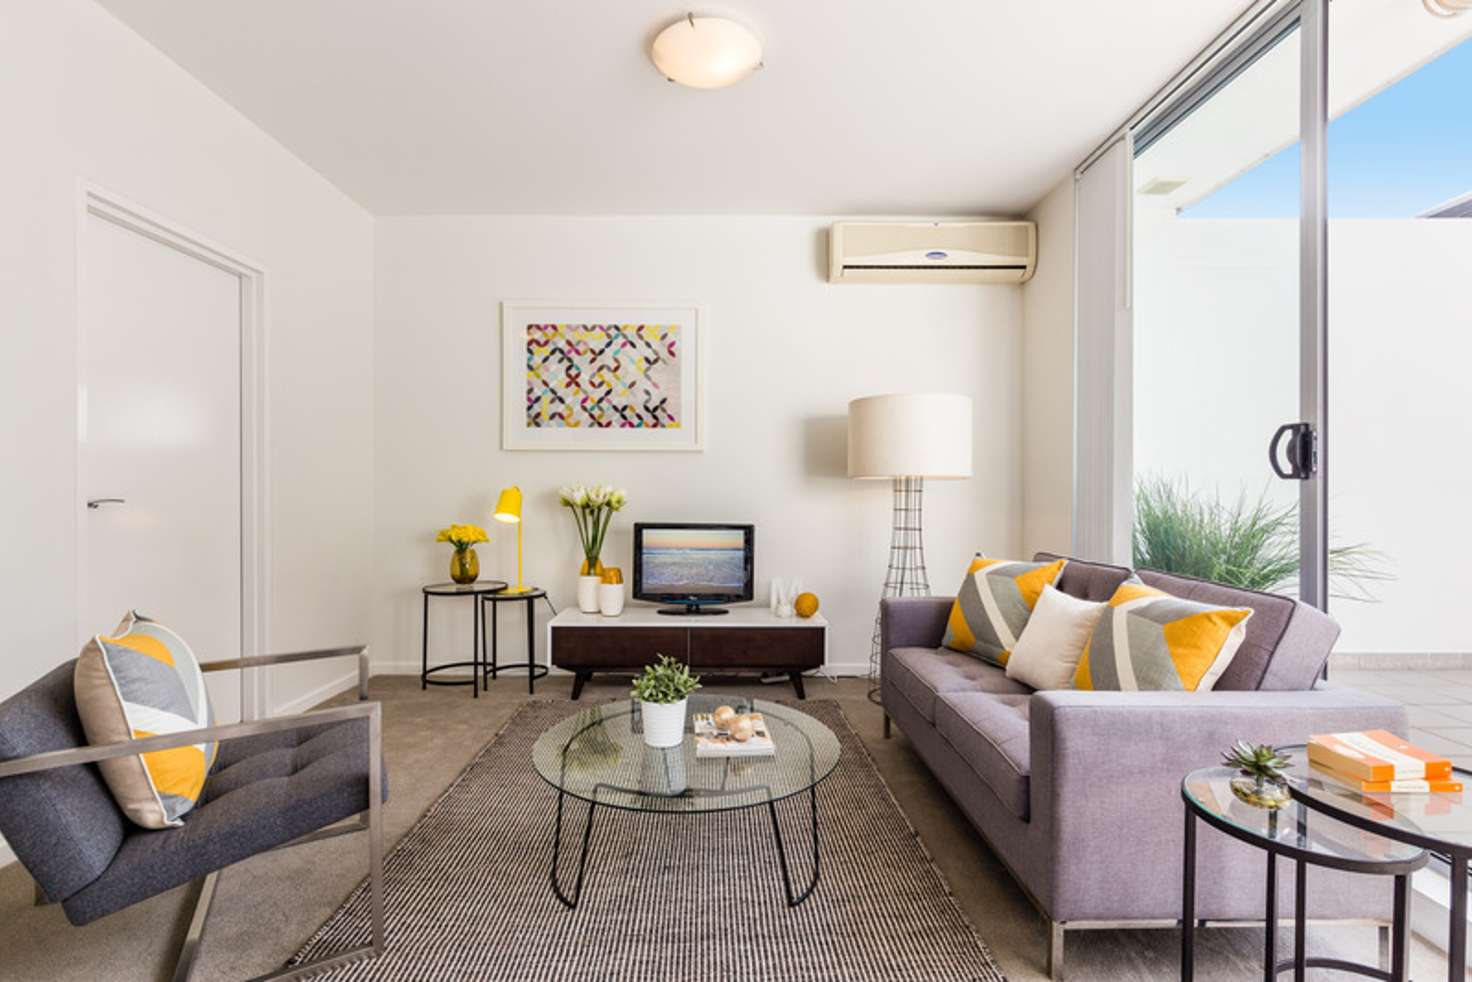 Main view of Homely apartment listing, 7/23 Lambert Street, Camperdown NSW 2050